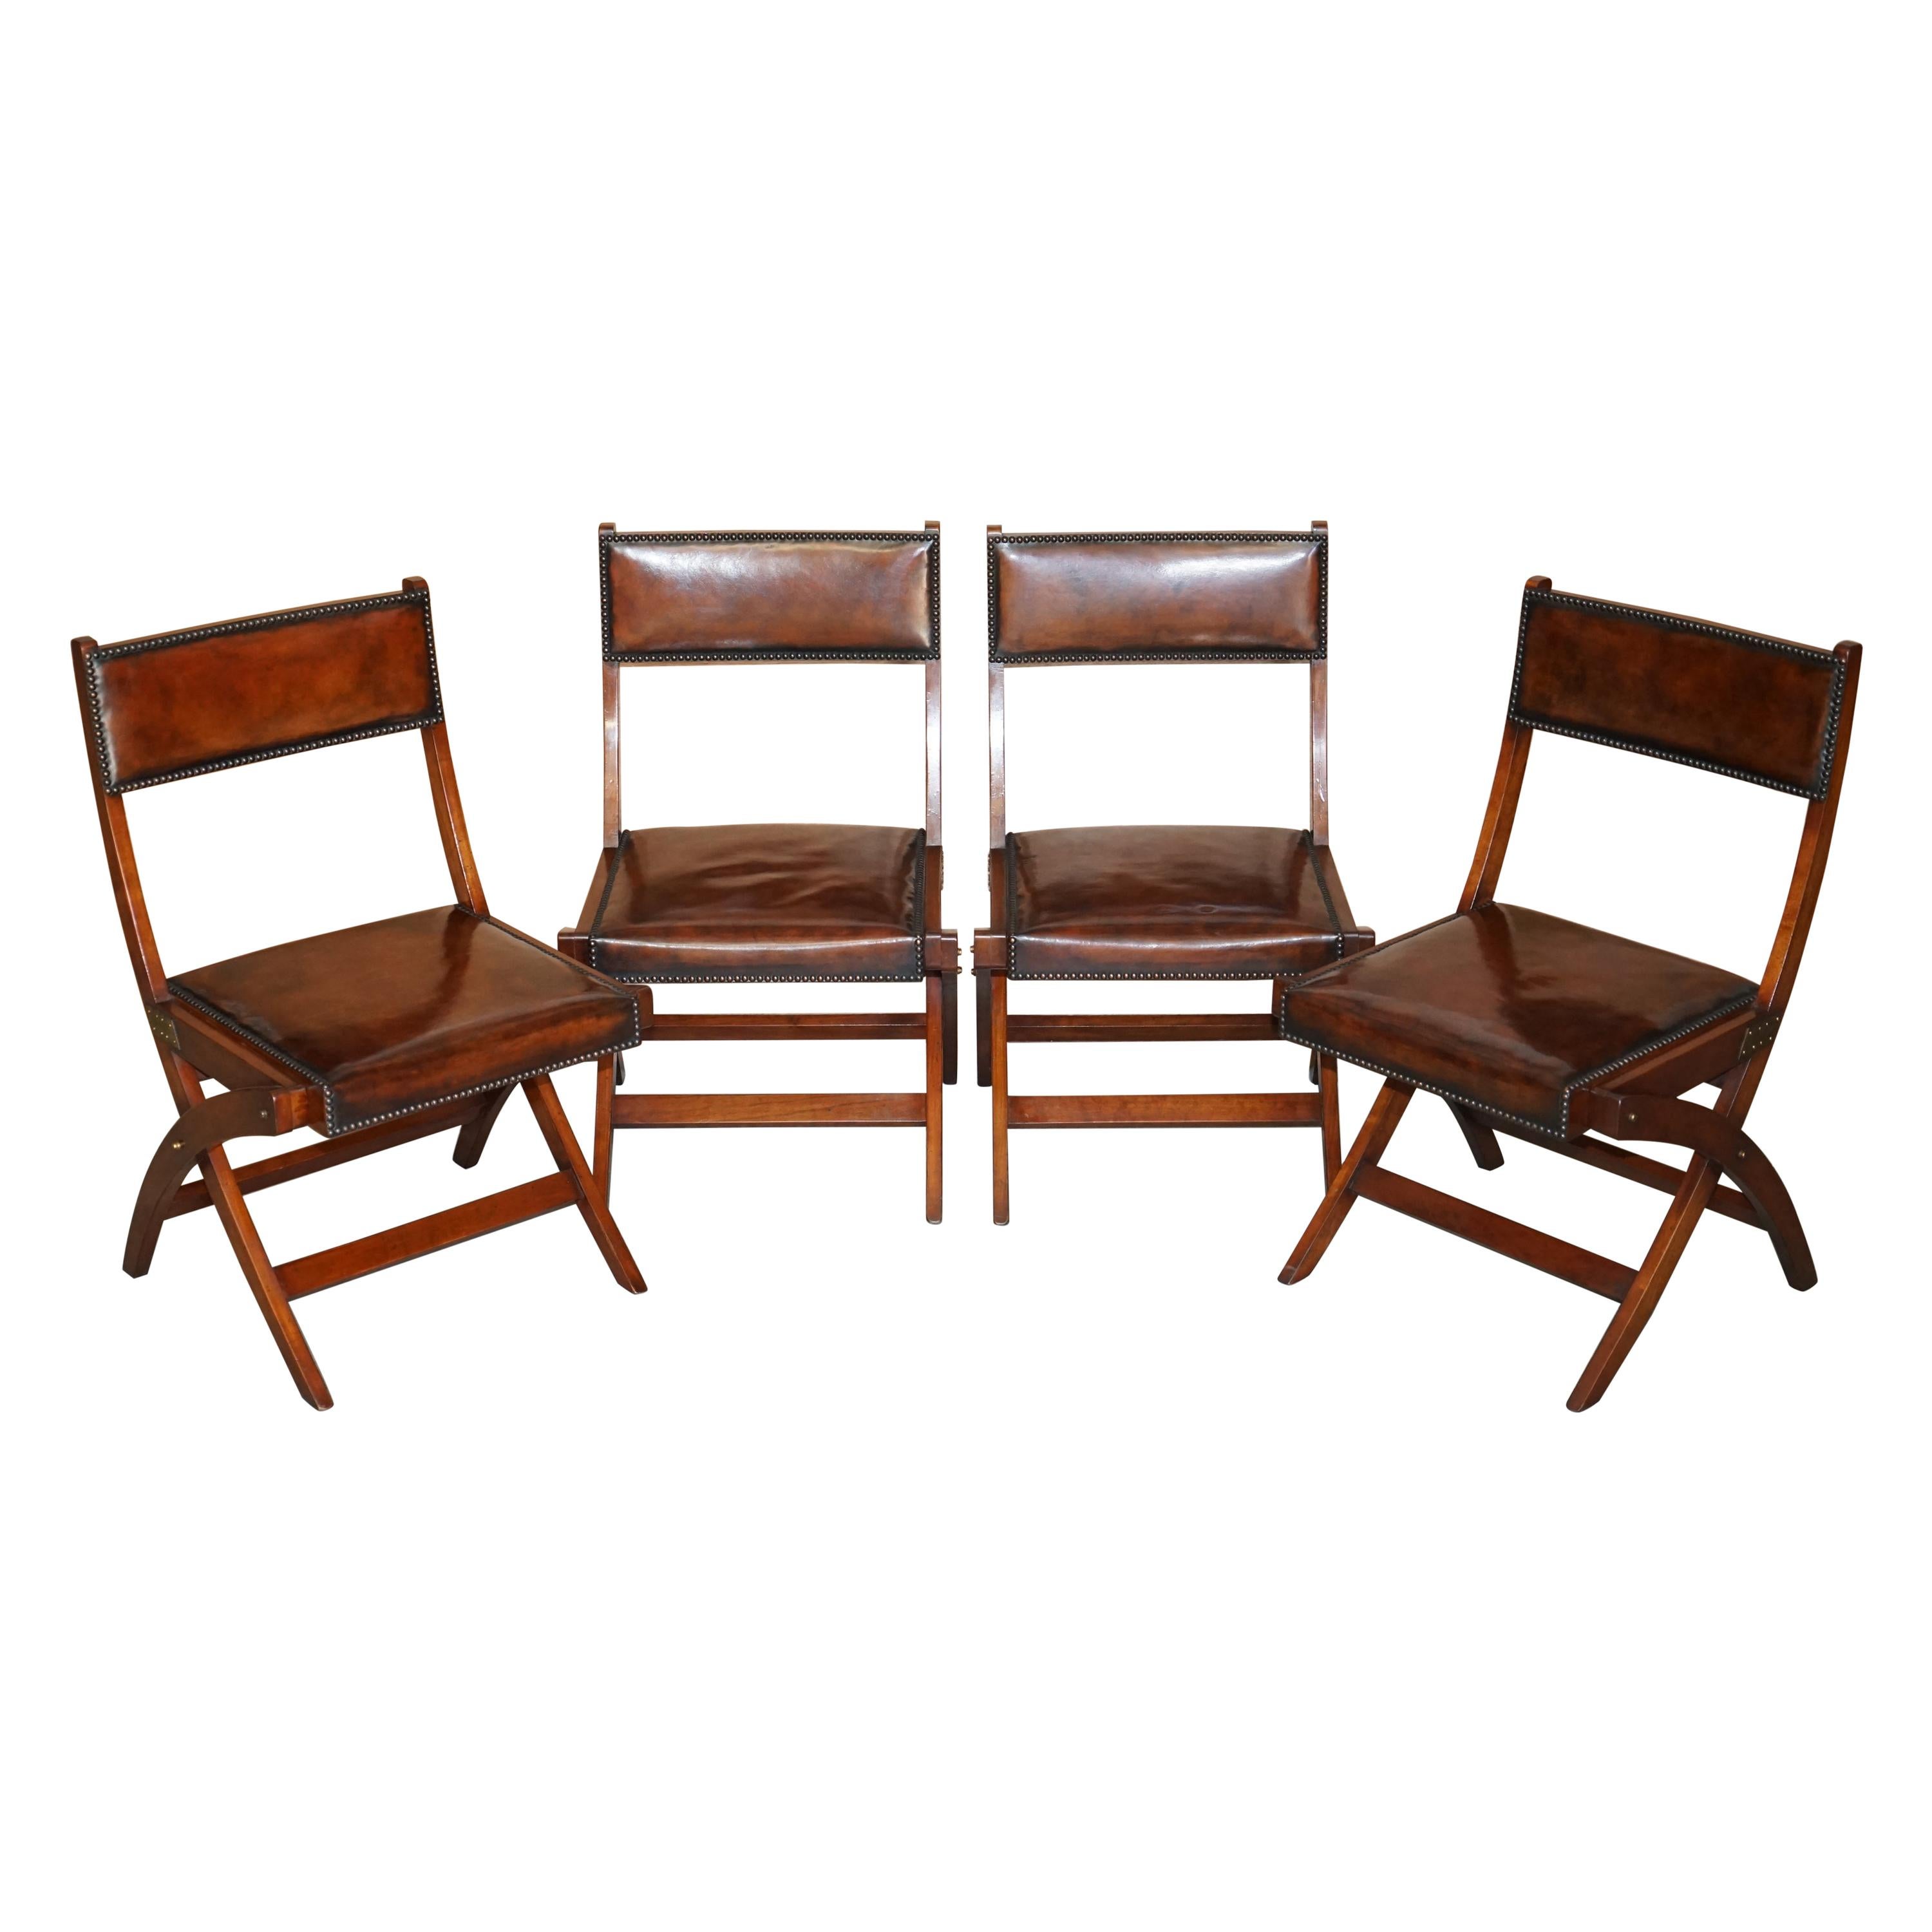 Four Fully Restored Cigar Brown Leather Harrods London Kennedy Campaign Chairs